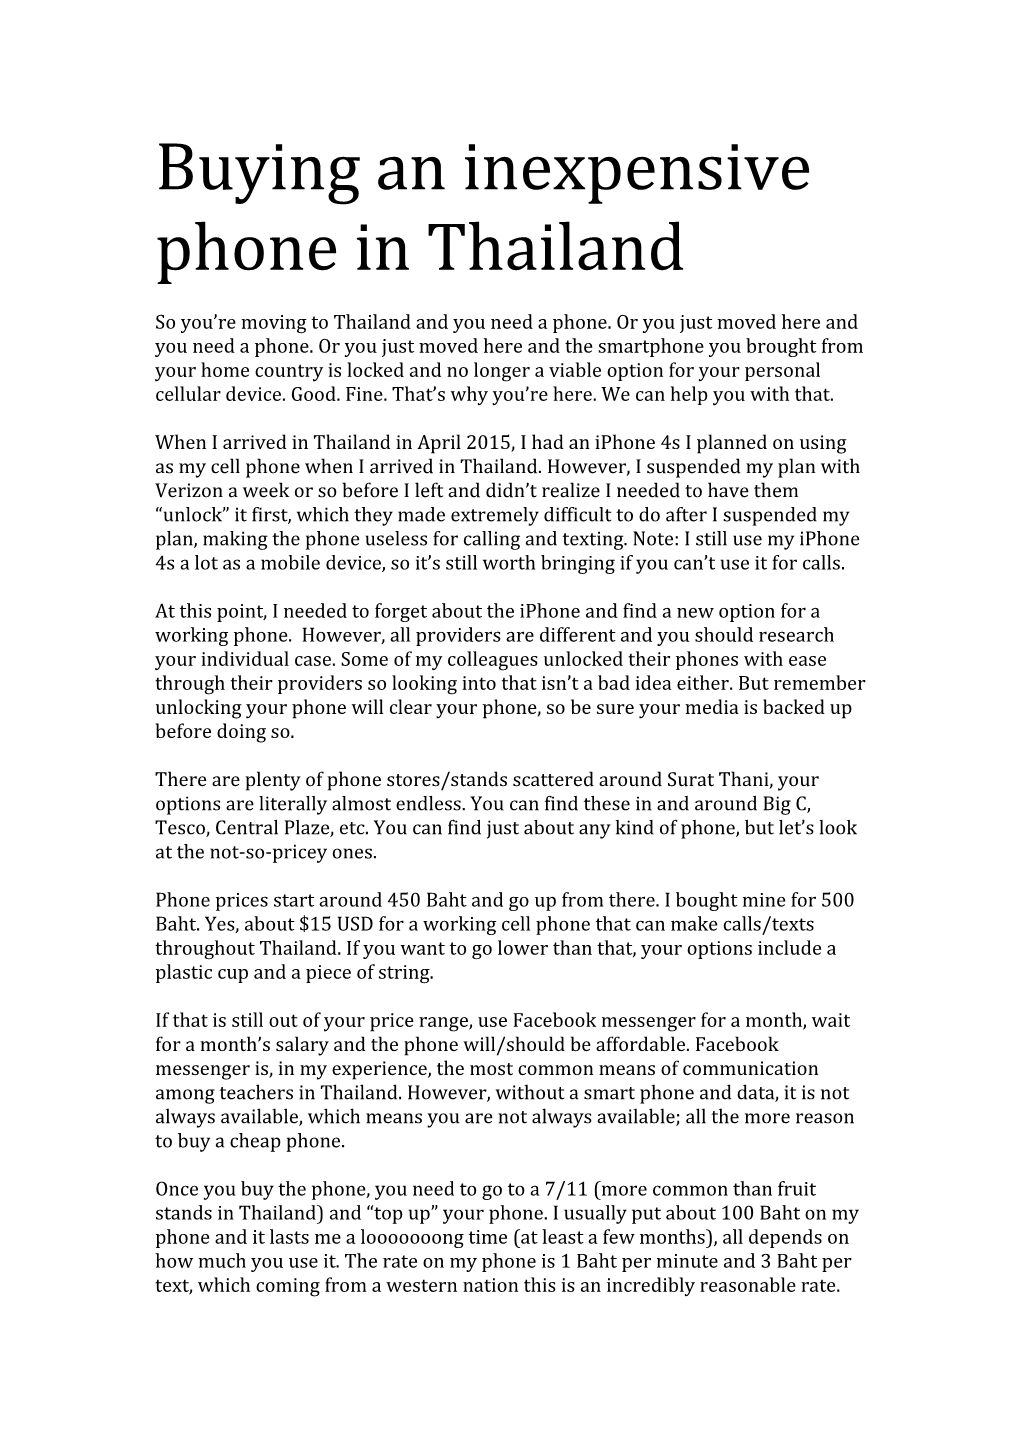 Buying an Inexpensive Phone in Thailand